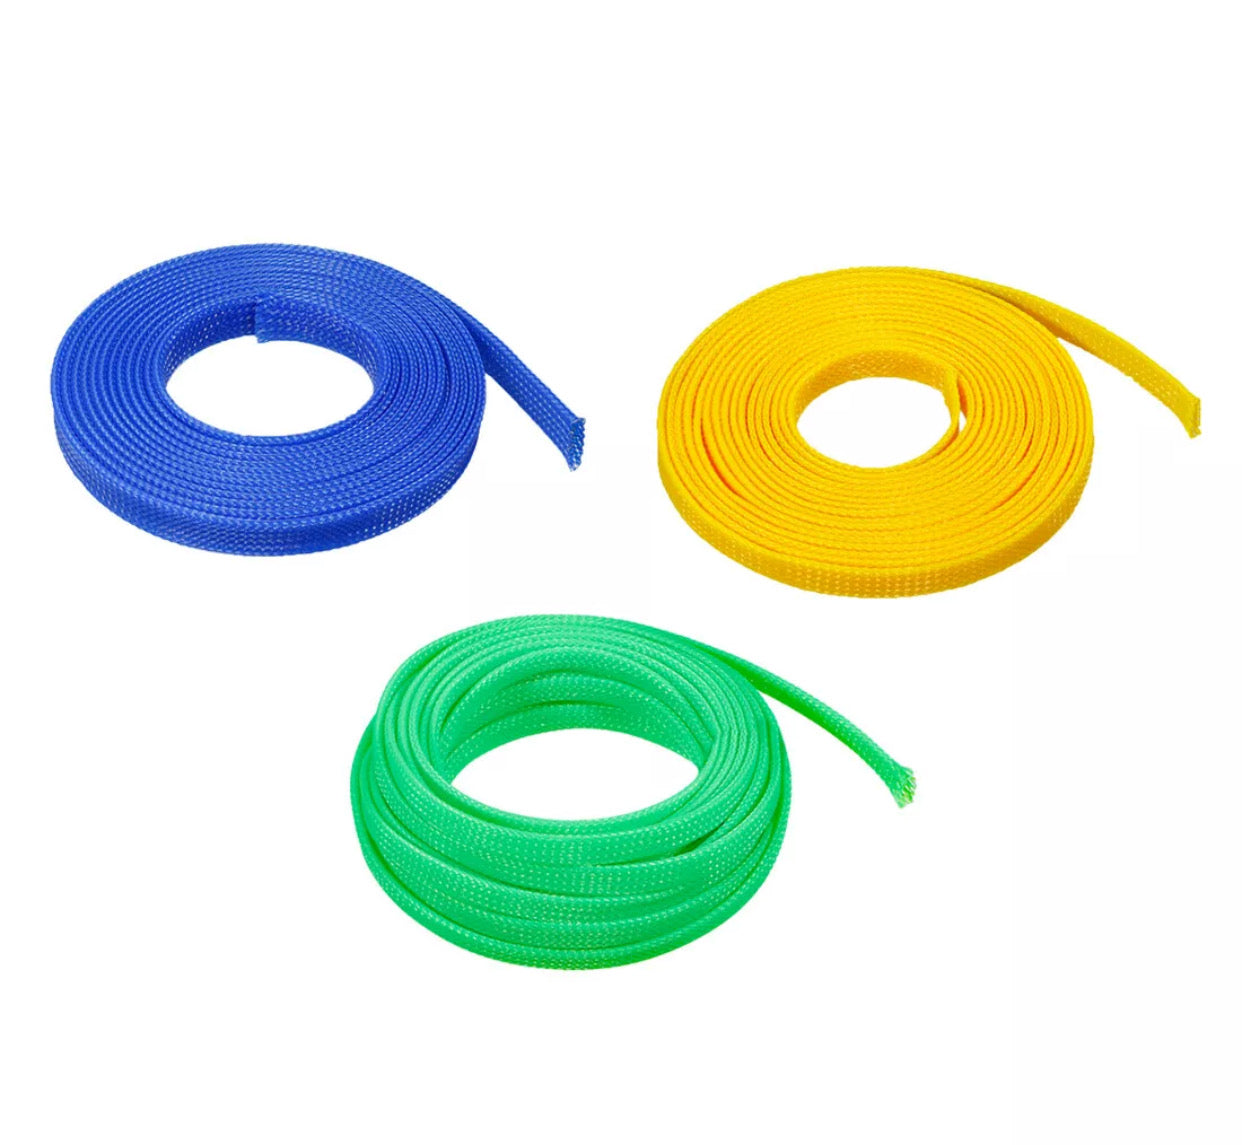 Out Fly Fishing Body Tubing - all colors